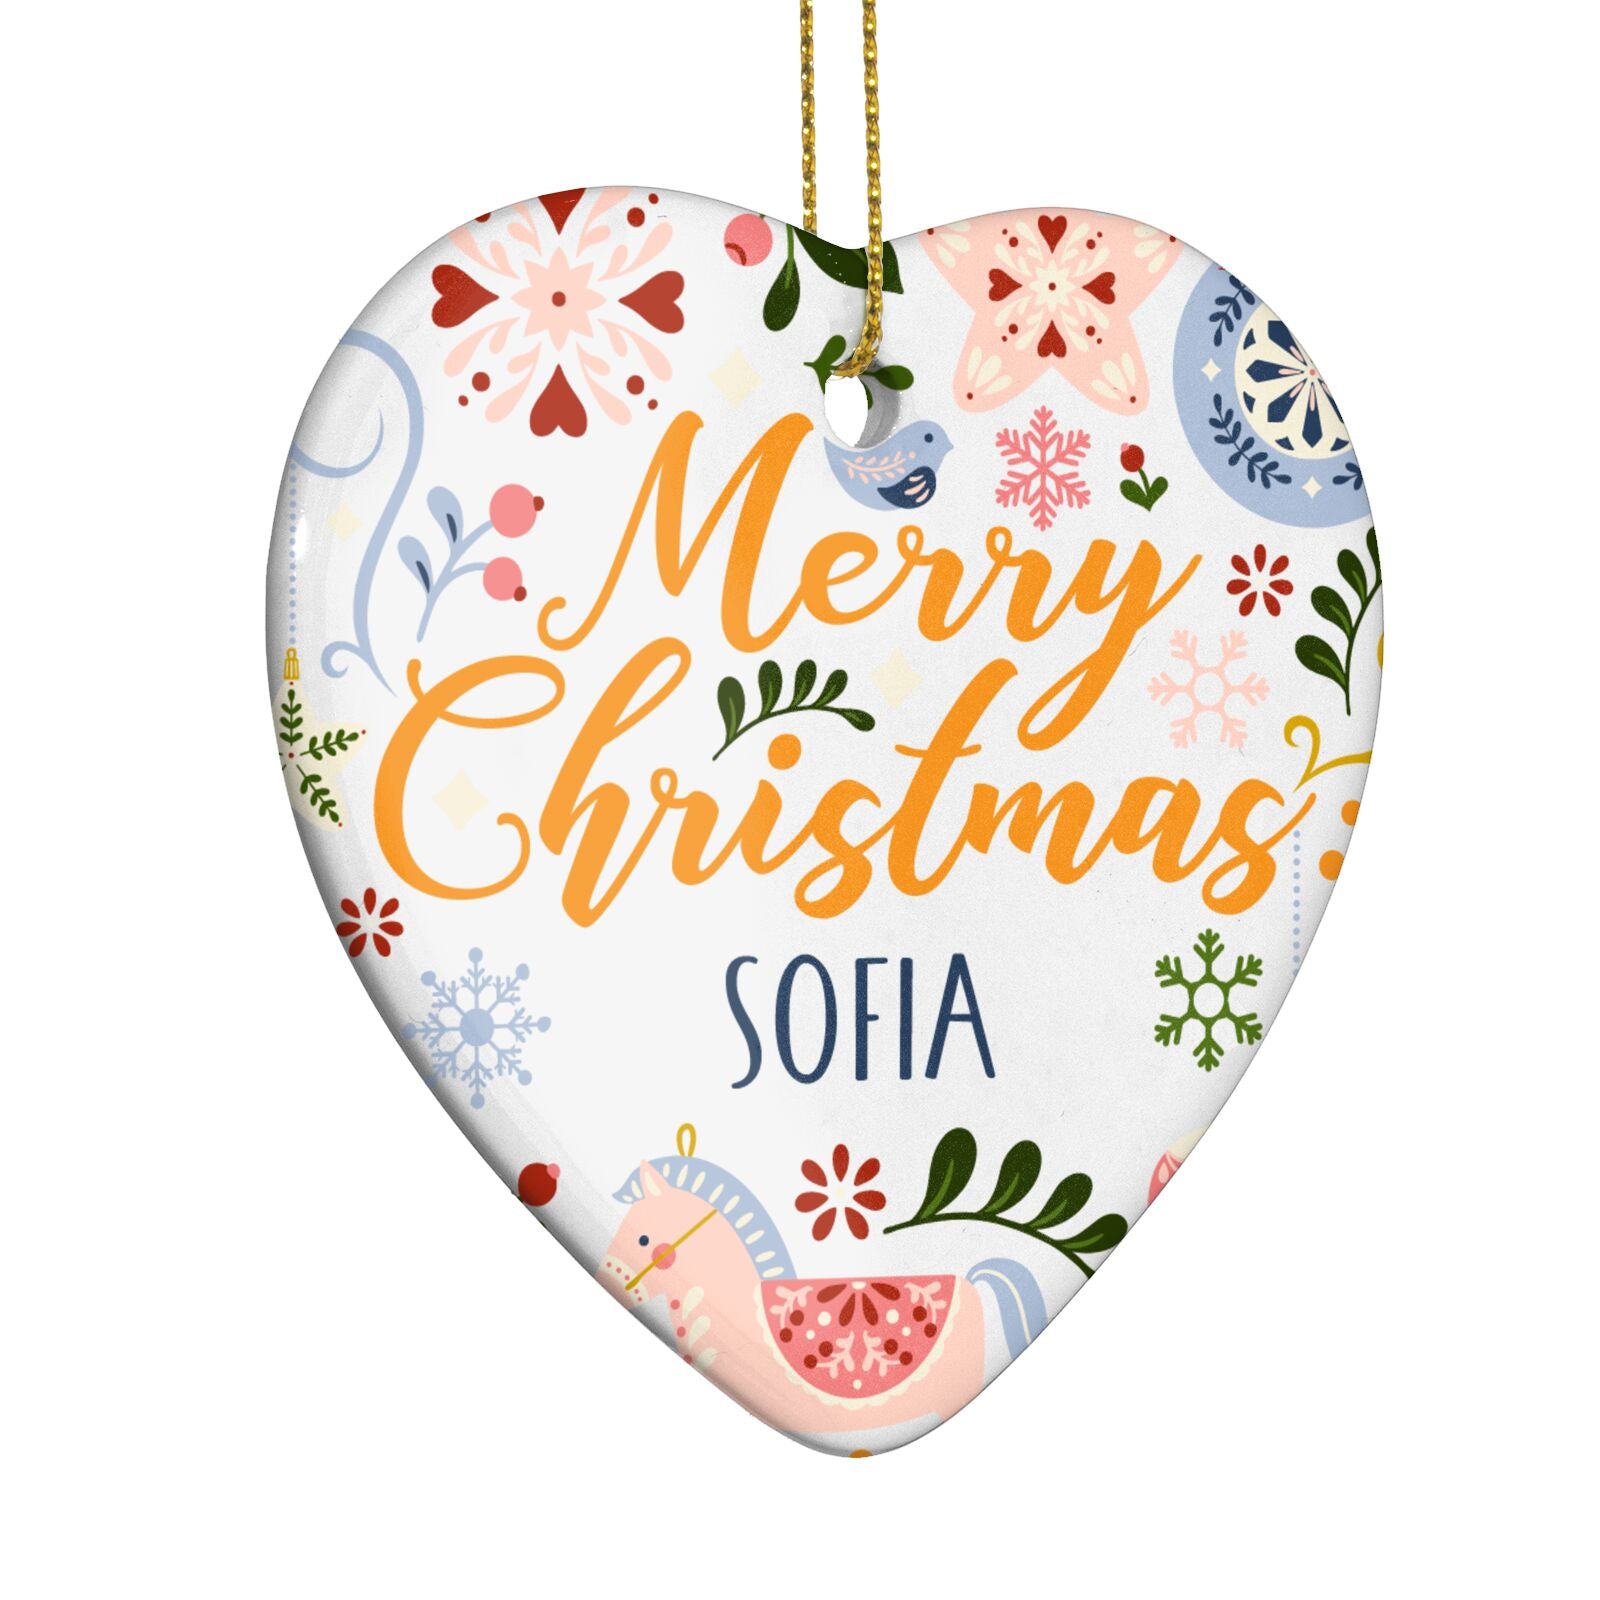 Merry Christmas Illustrated Heart Decoration Side Angle